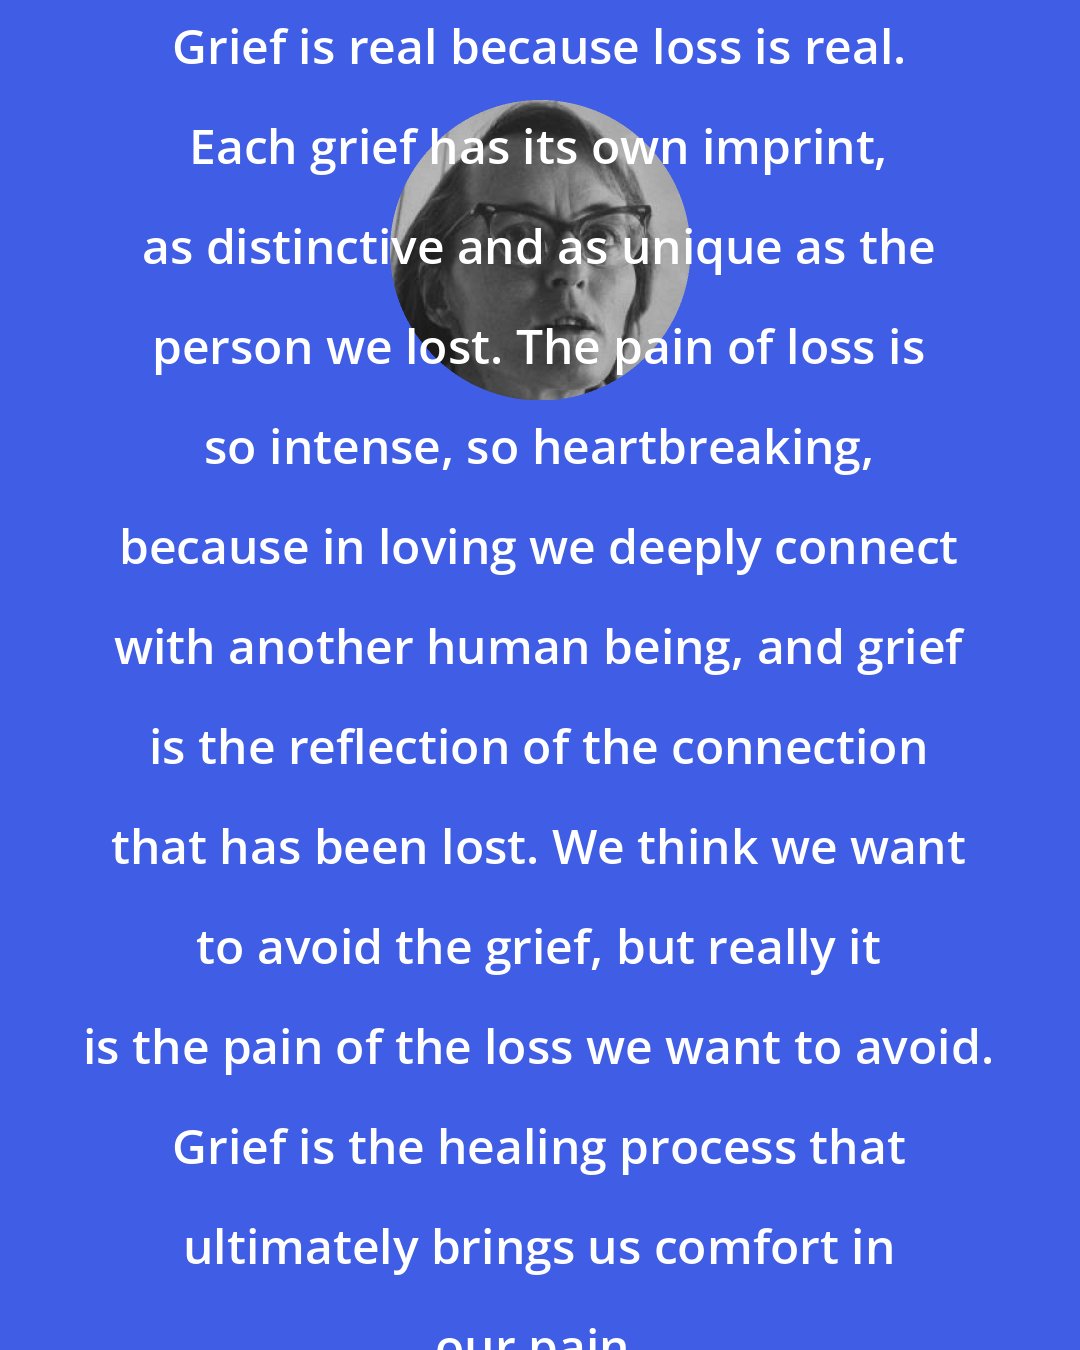 Elisabeth Kubler-Ross: Grief is real because loss is real. Each grief has its own imprint, as distinctive and as unique as the person we lost. The pain of loss is so intense, so heartbreaking, because in loving we deeply connect with another human being, and grief is the reflection of the connection that has been lost. We think we want to avoid the grief, but really it is the pain of the loss we want to avoid. Grief is the healing process that ultimately brings us comfort in our pain.